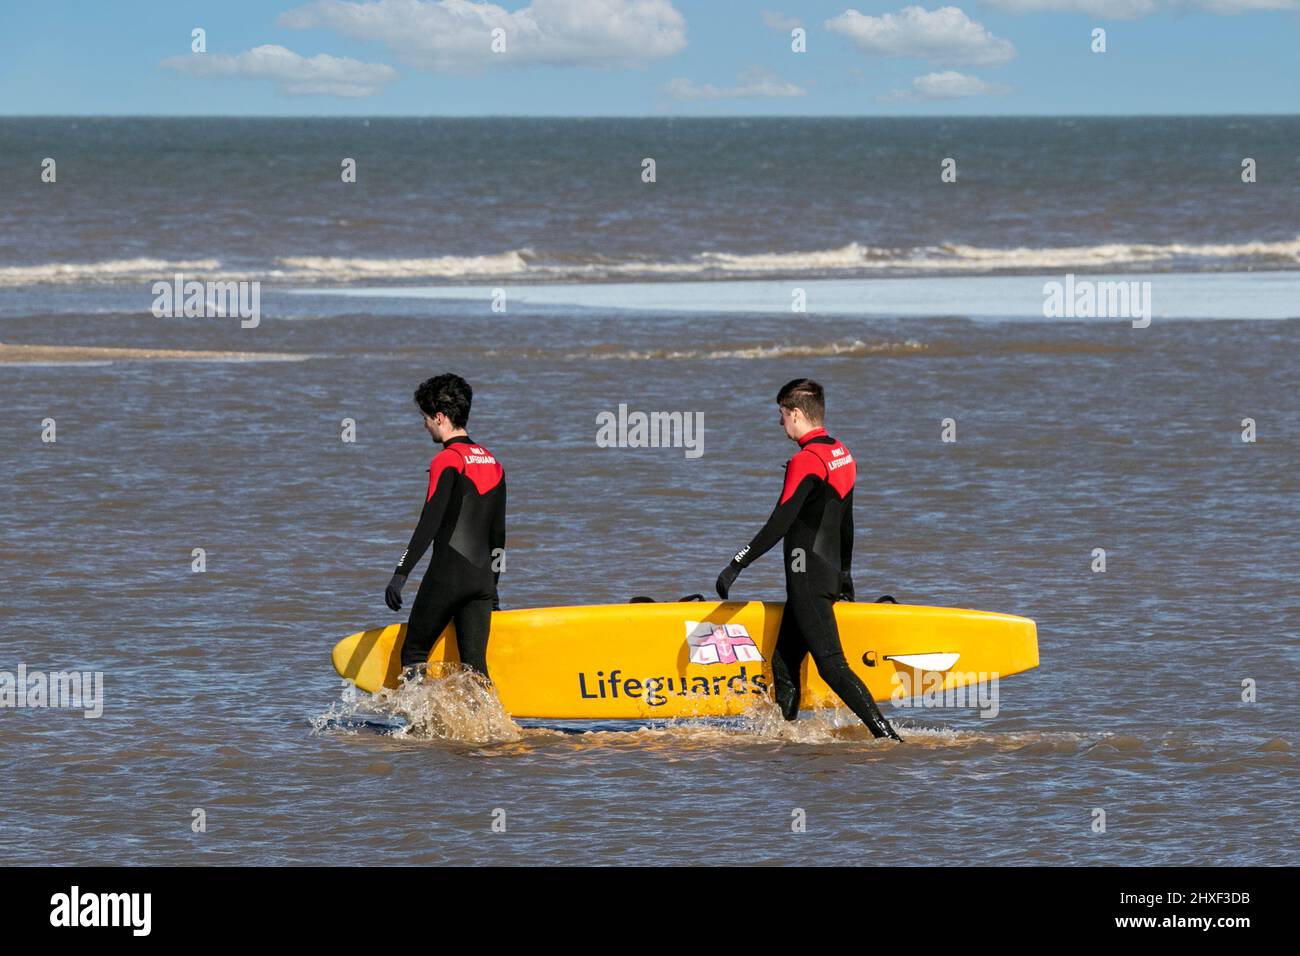 Southport, Merseyside, 12th March 2022.  Preparations are under way for the upcoming summer season as RNLI Lifeguards undergo a training session in the freezing cold Irish Sea along the North West Coastline at Southport.  Credit: Cernan Elias/Alamy Live News Stock Photo